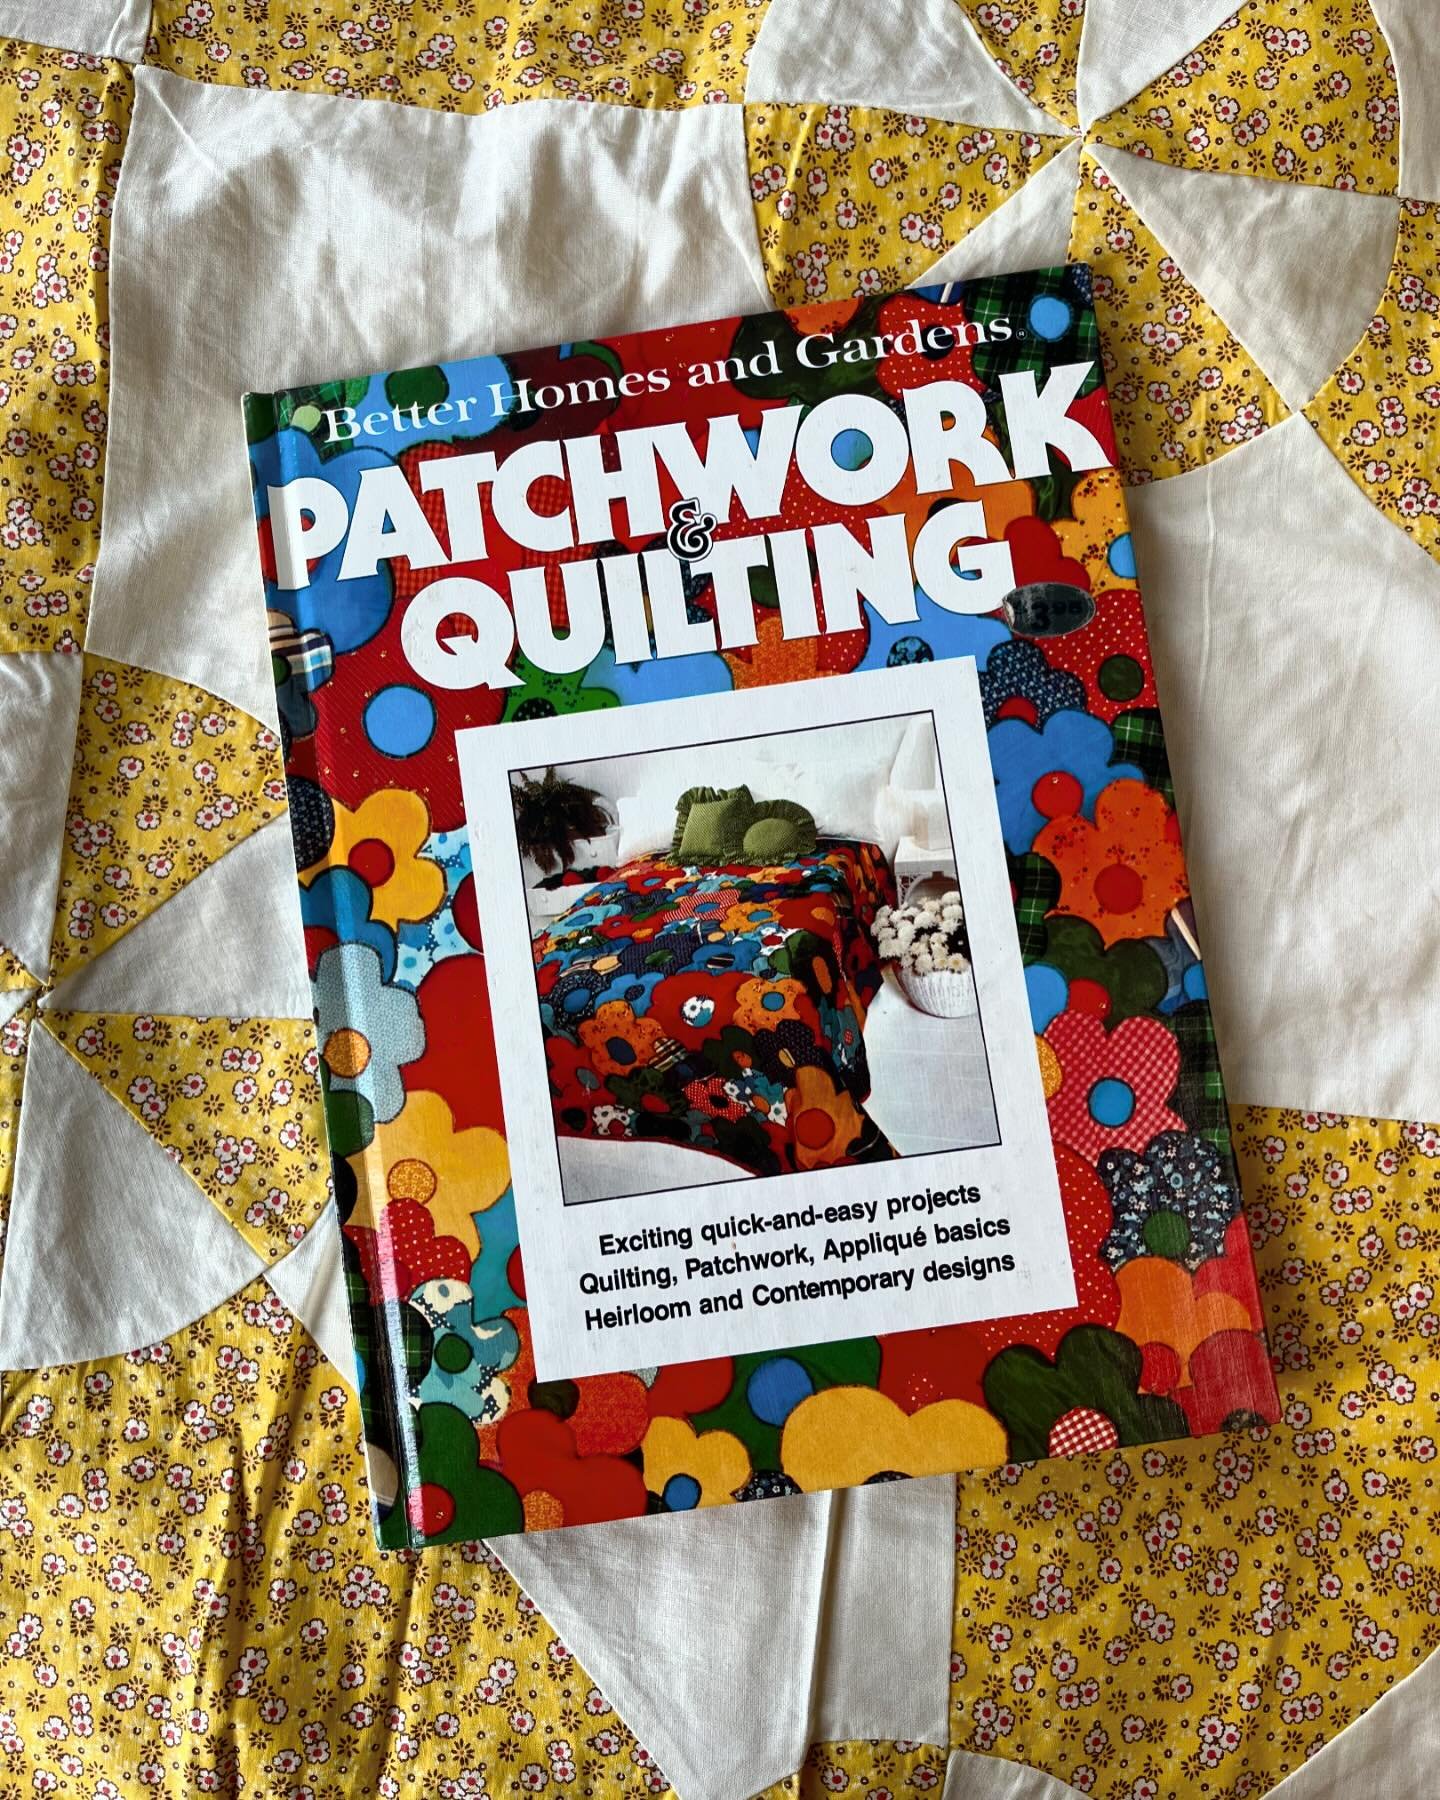 Store highlights this week:
1. This sweet vintage patchwork quilt book
2. Three vintage quilts and one quilt top
3. Lots and lots and lots of jacquard ribbon donated by @redroverclothing 
4. Fashion fabric yardage - great textures and natural fibers 